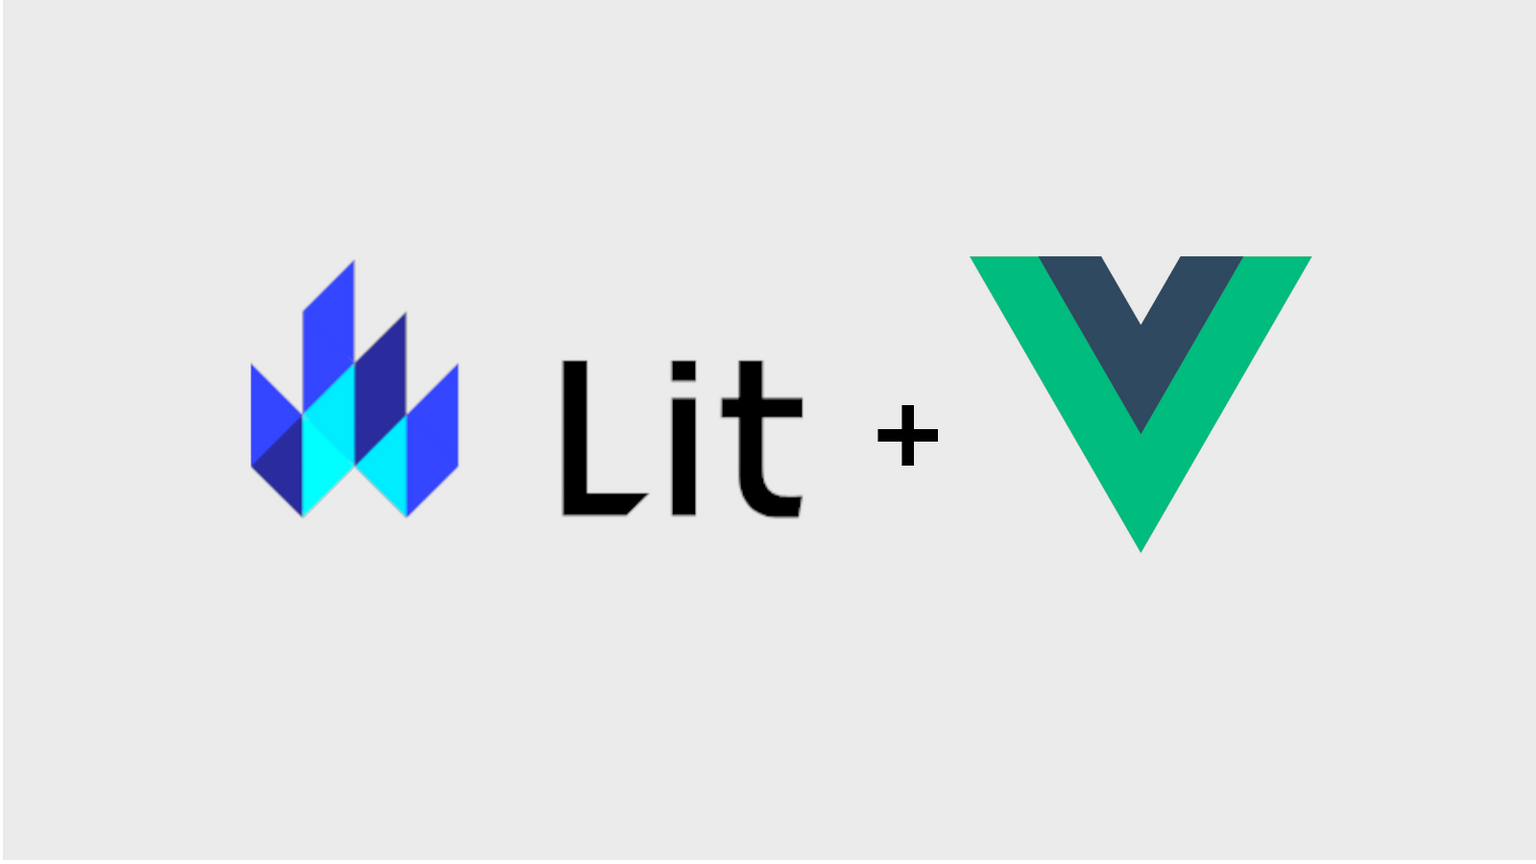 Lit and Vue logos on a light background